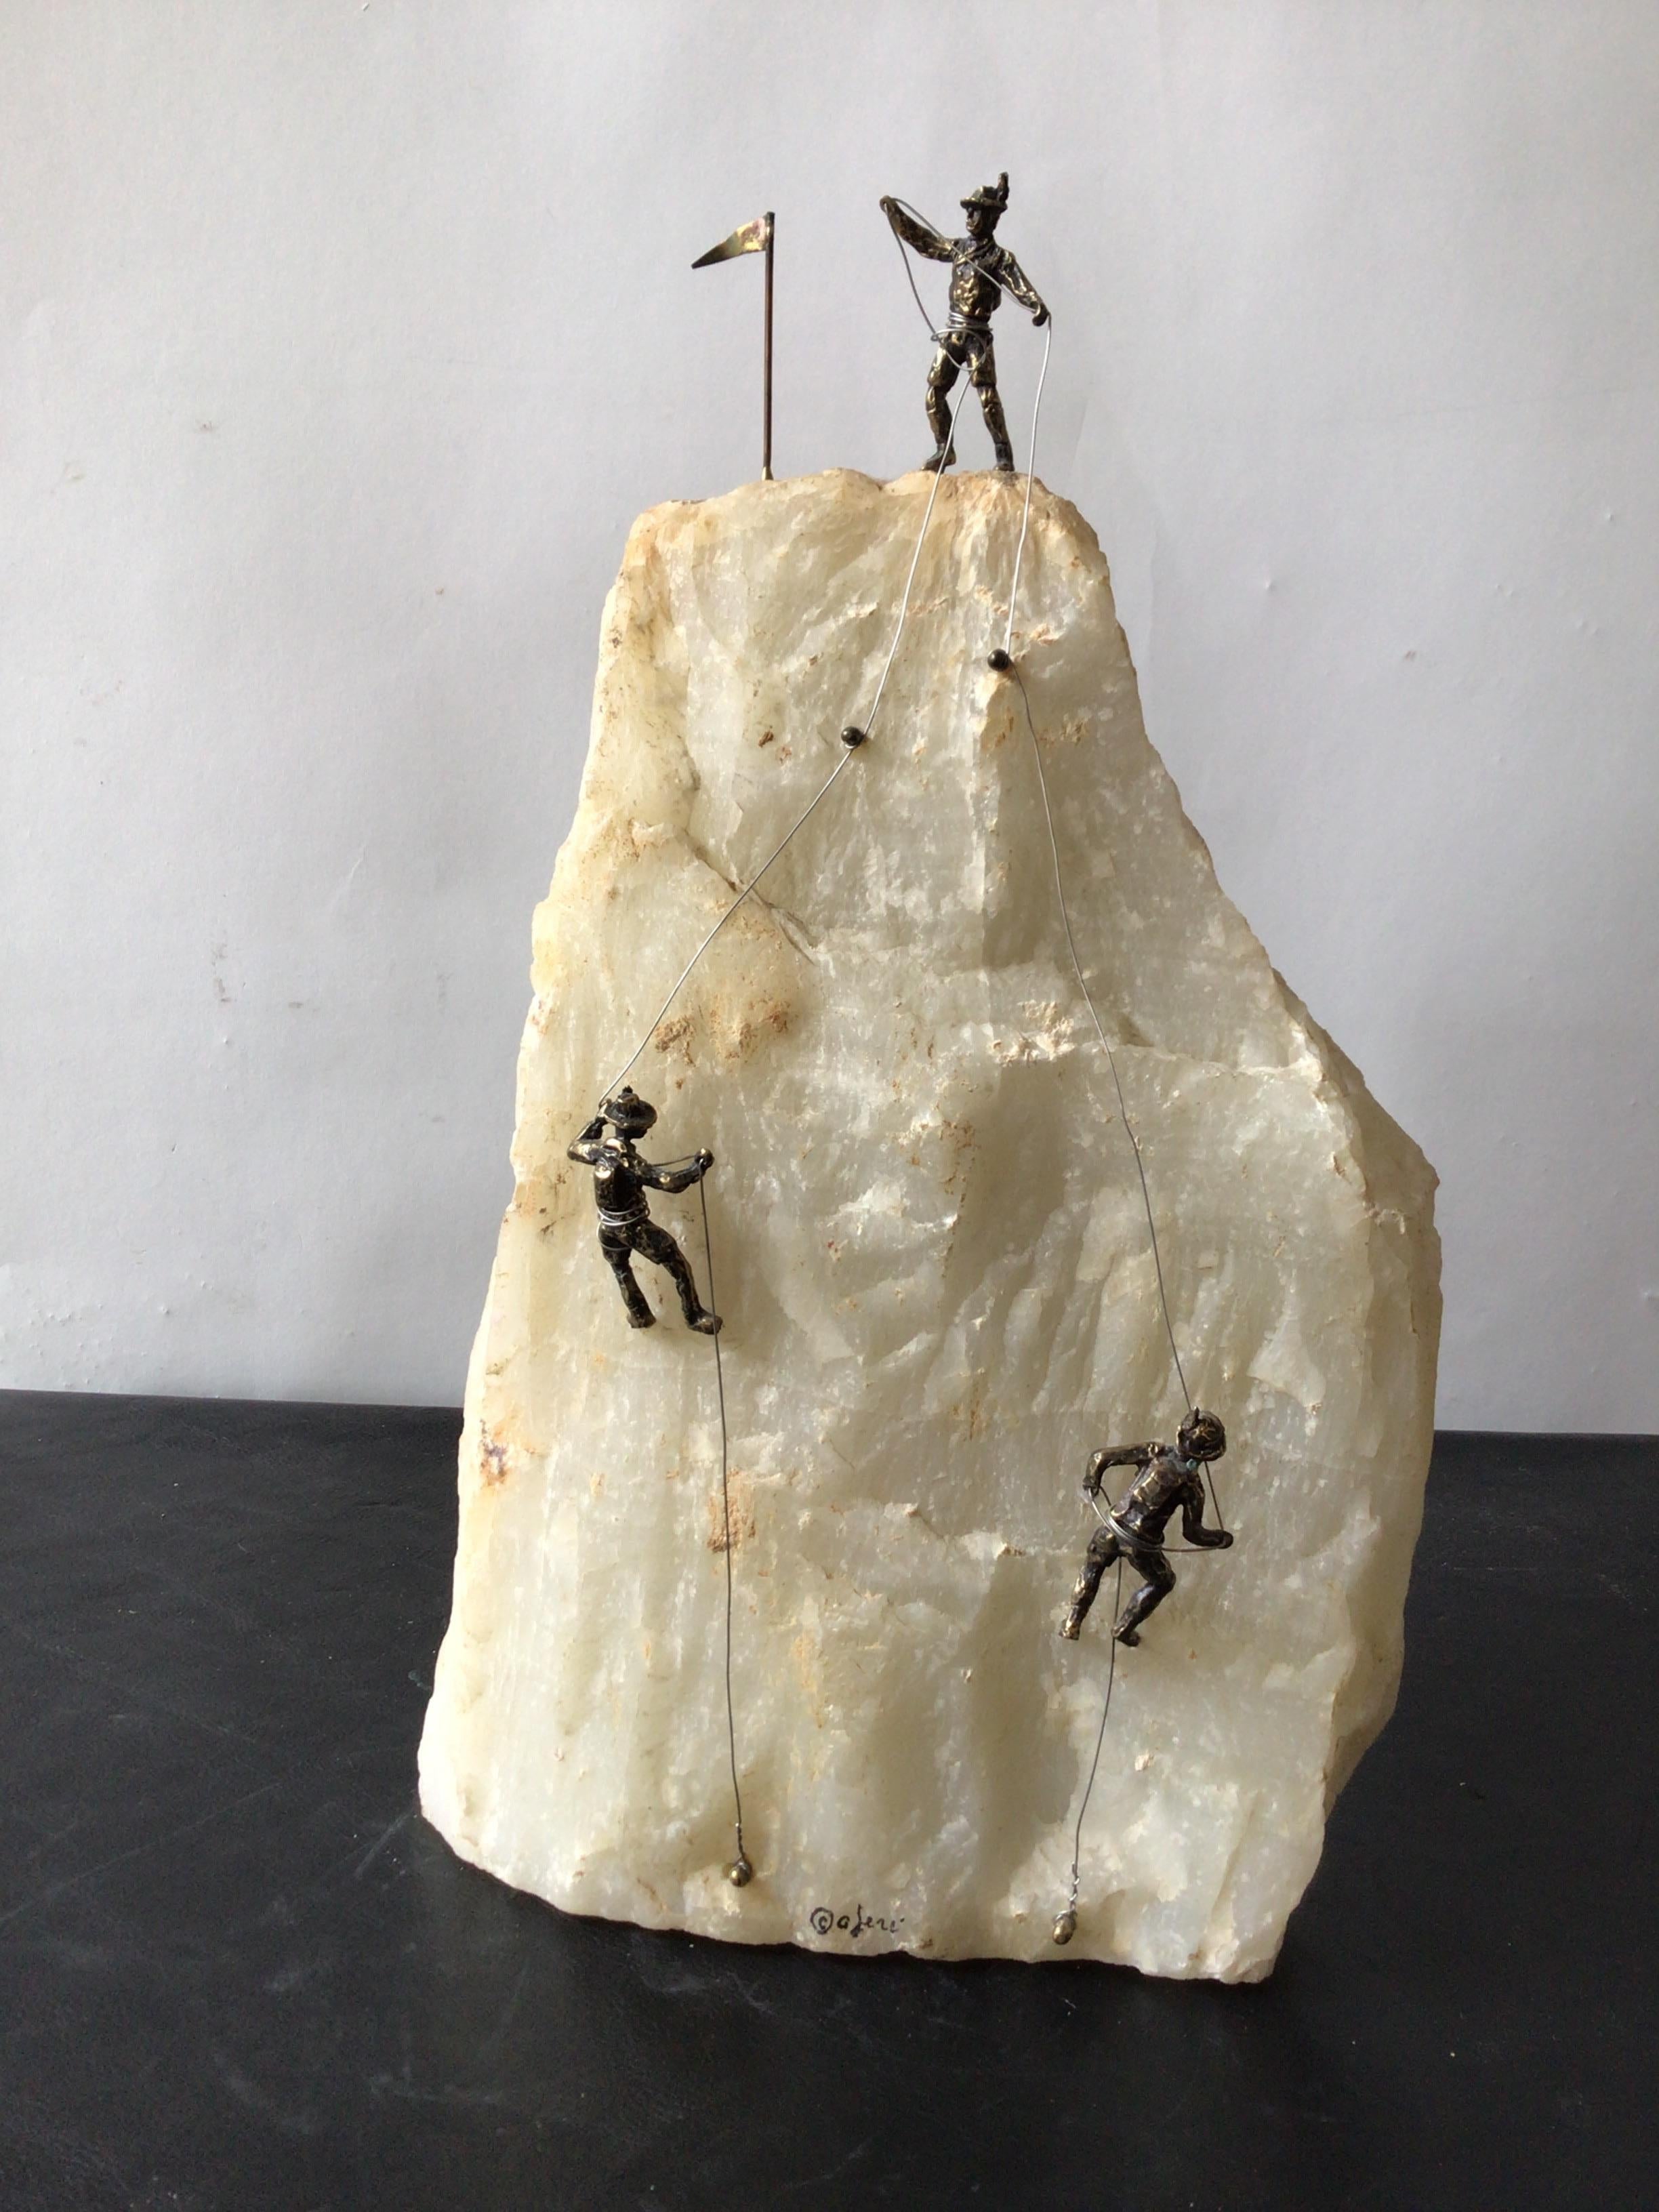 1970s Sculpture of mountain climbers. Quartz and bronze. Signed Jere.